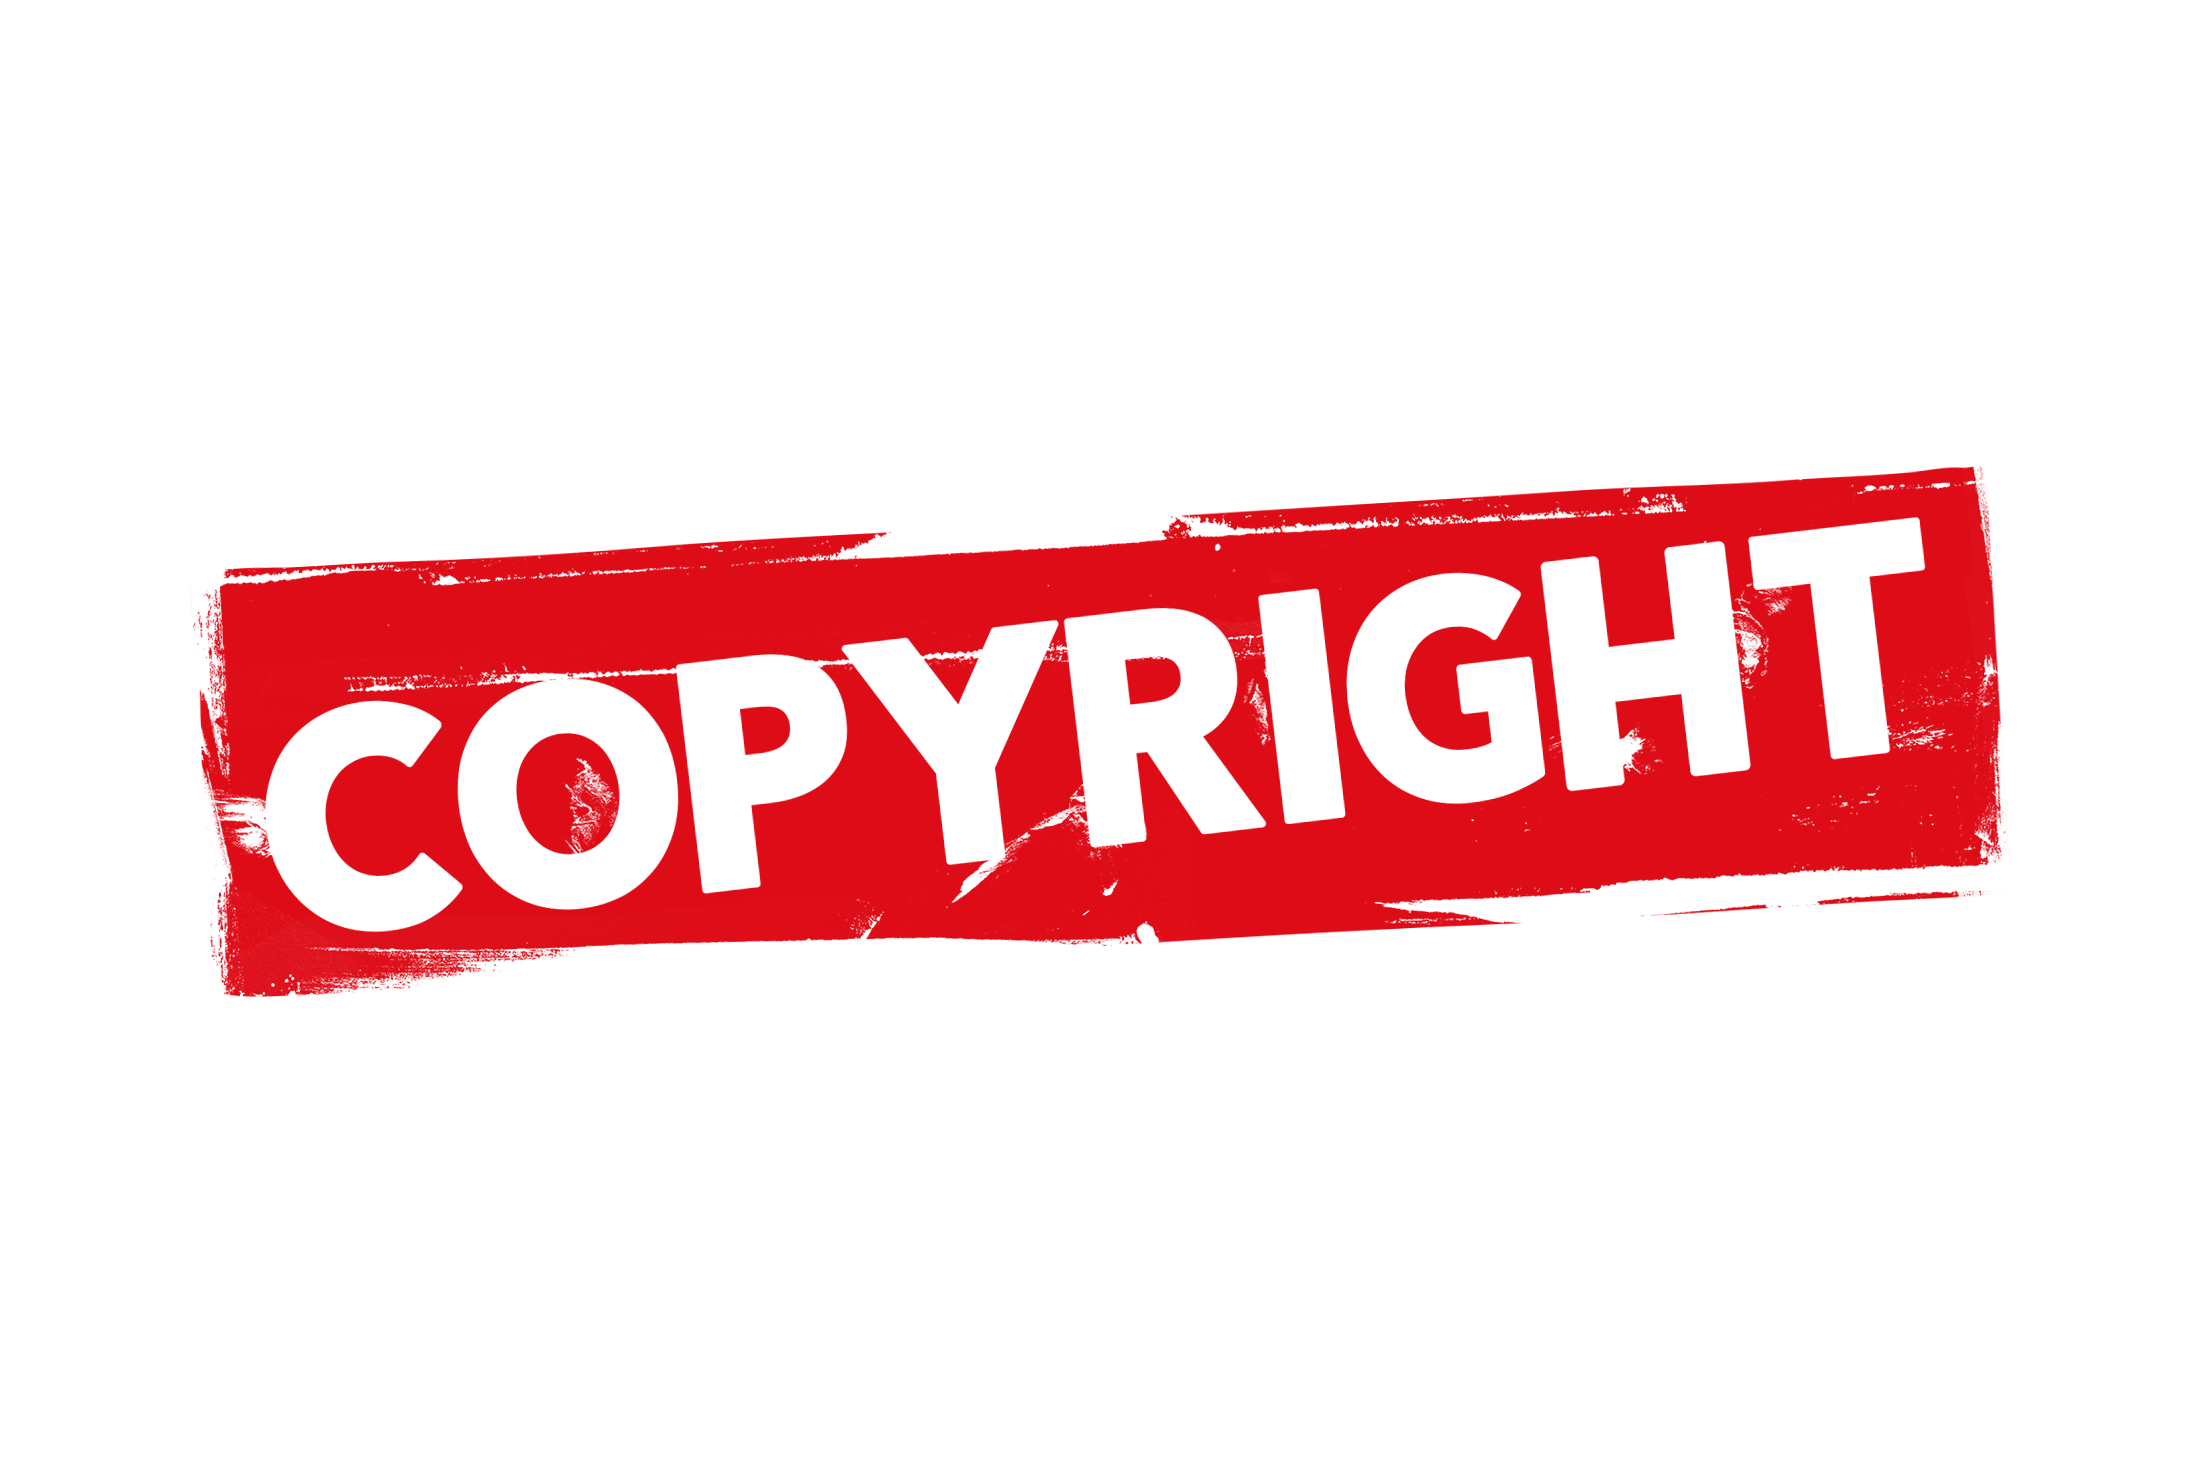 Grunge copyright label PNG and PSD